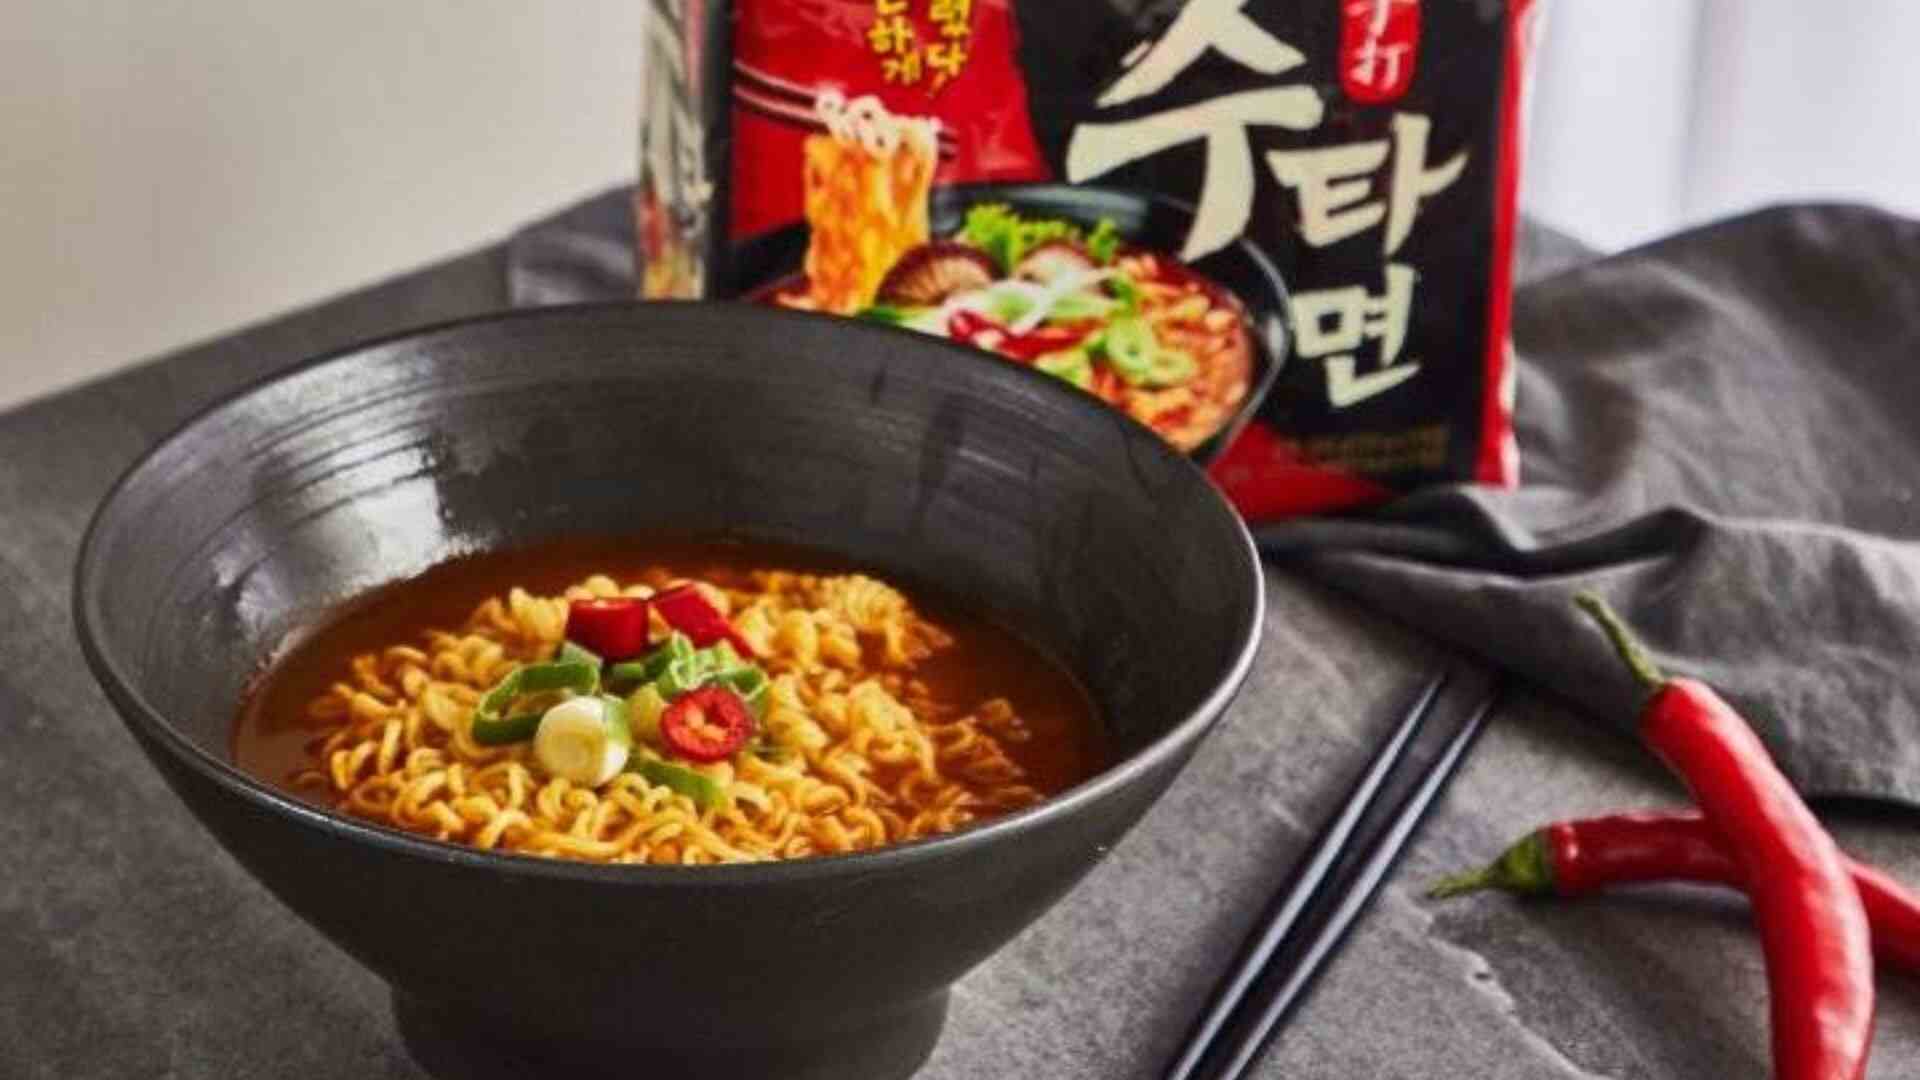 Denmark Issues Recalls On Ramen Noodles, Here’s Why